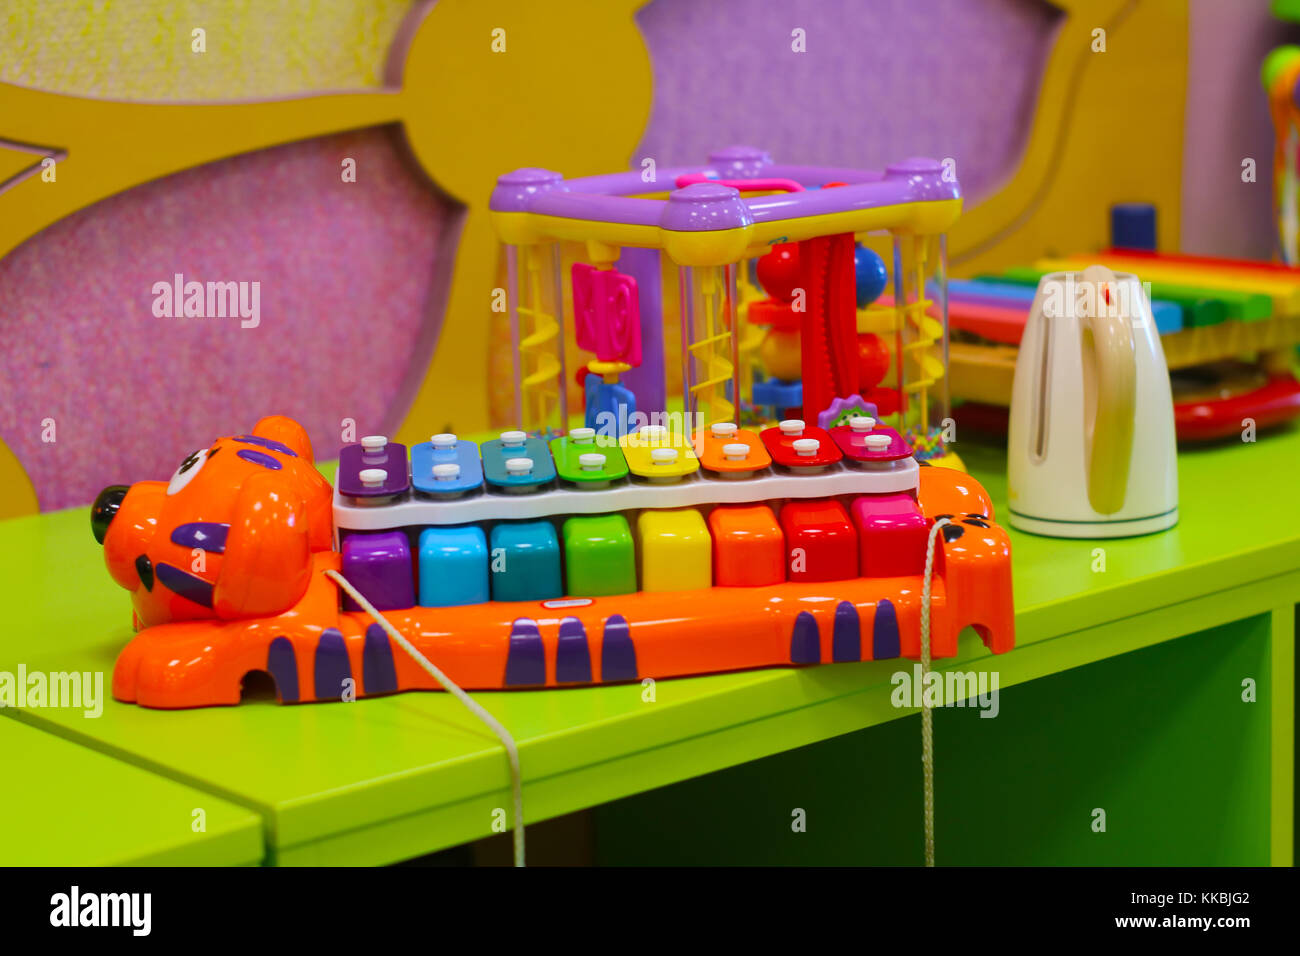 Rainbow colored xylophone on the table among toys in baby room. Stock Photo